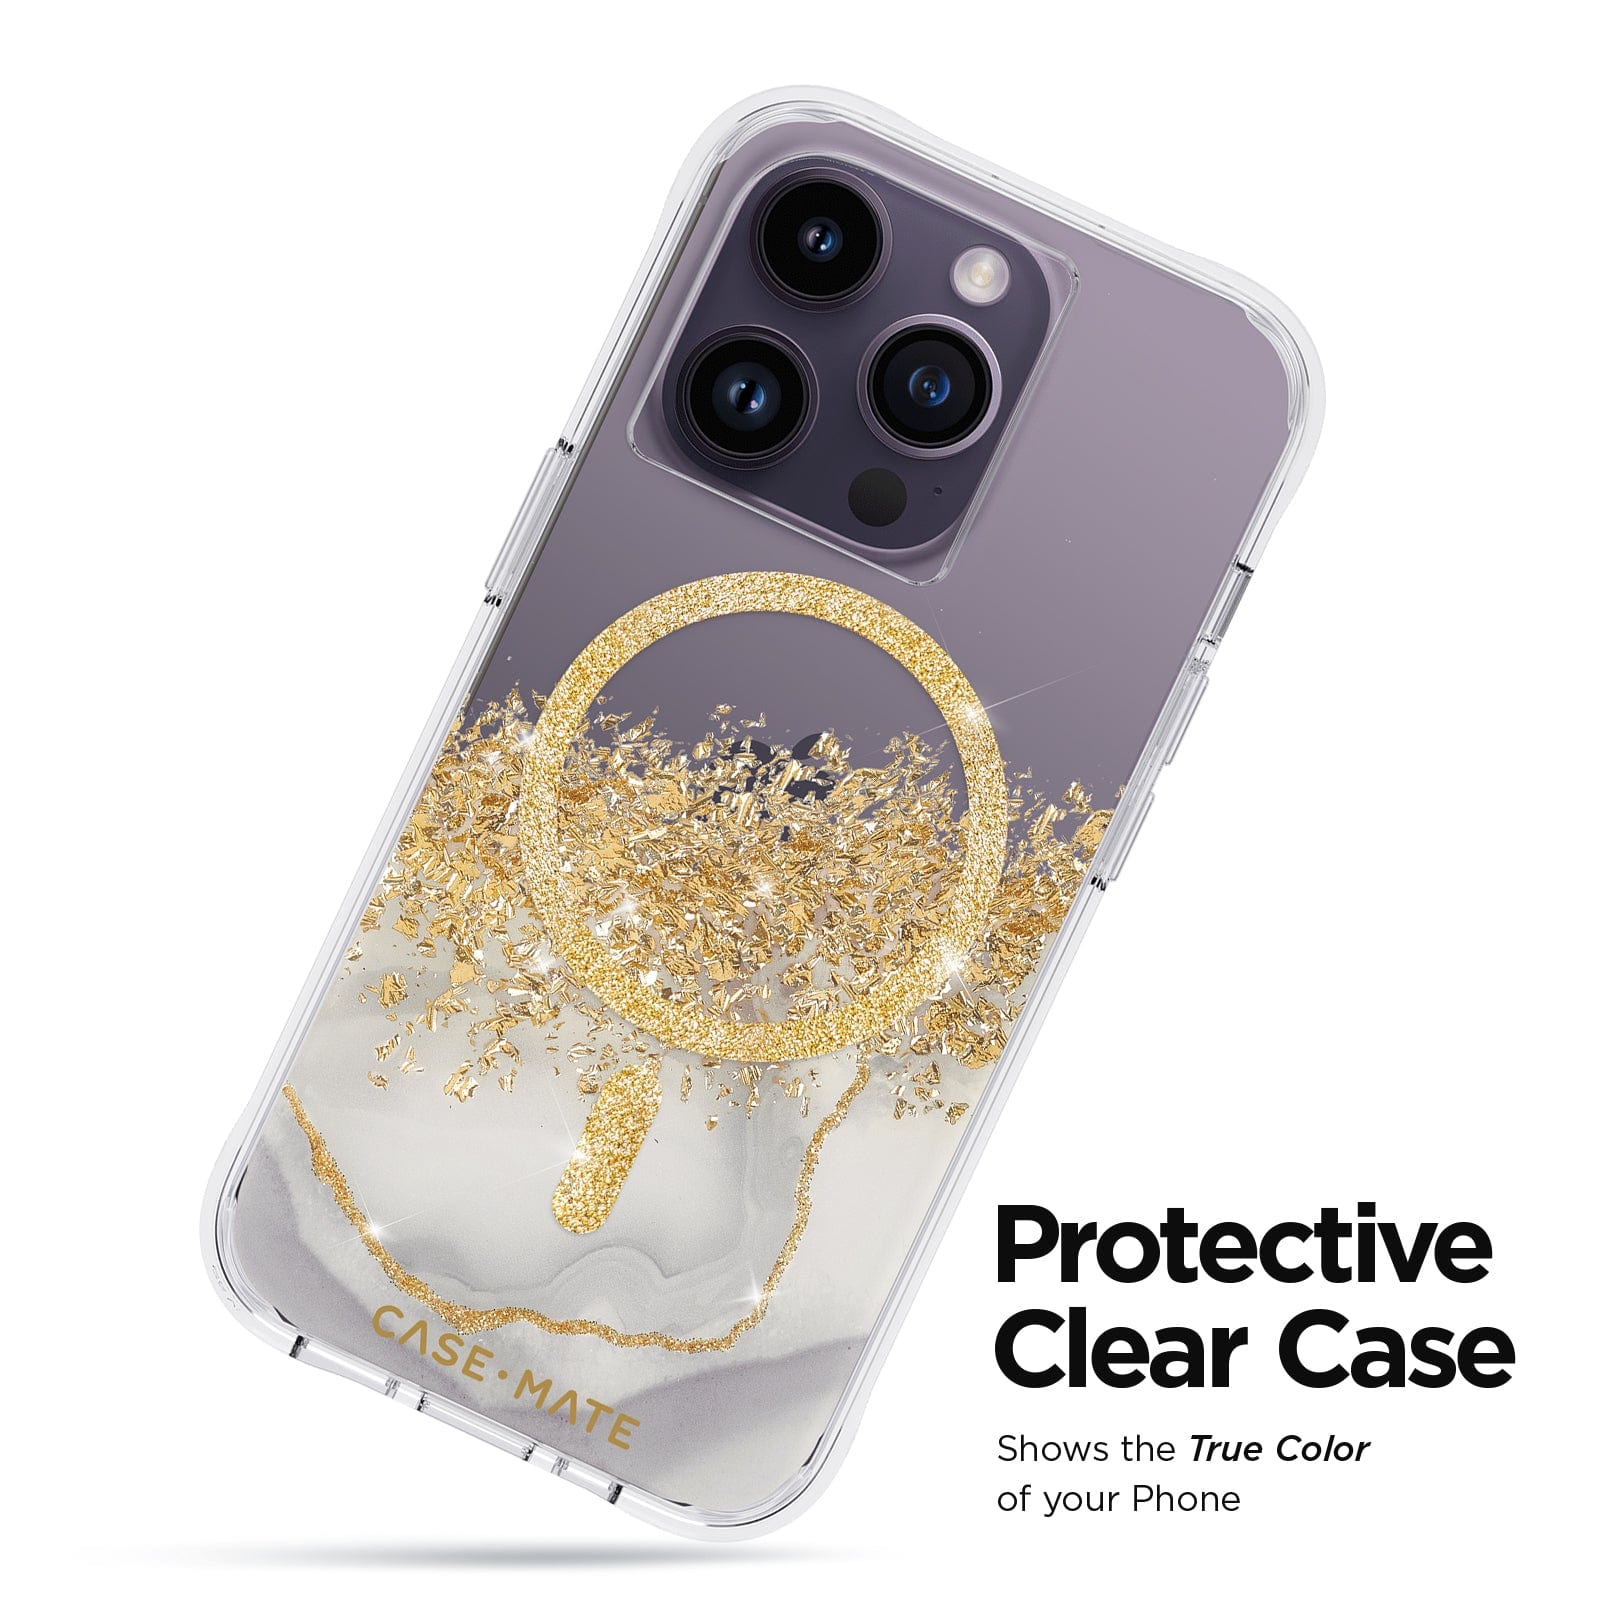 PROTECTIVE CLEAR CASE. SHOWS THE TRUE COLOR OF YOUR PHONE. 